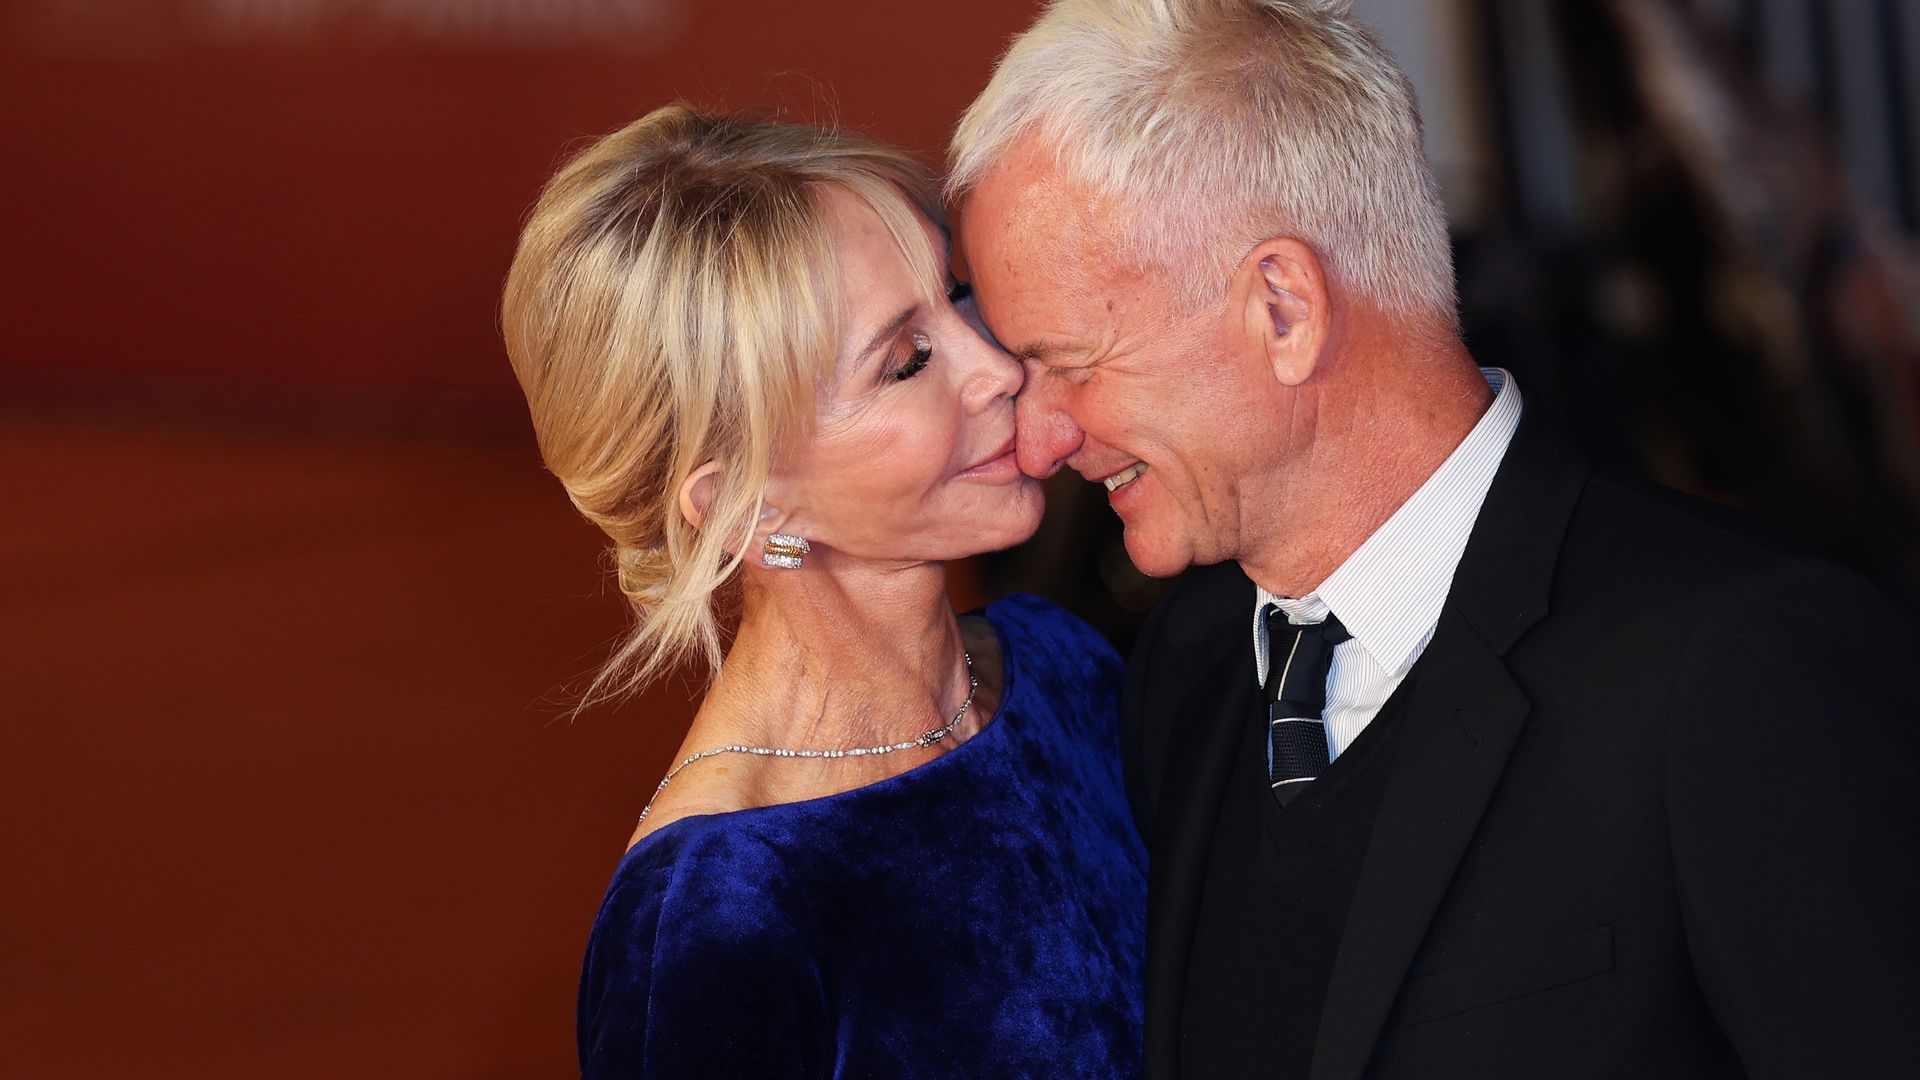 Sting, 72, looks more in love than ever with stunning wife Trudie Styler, 69